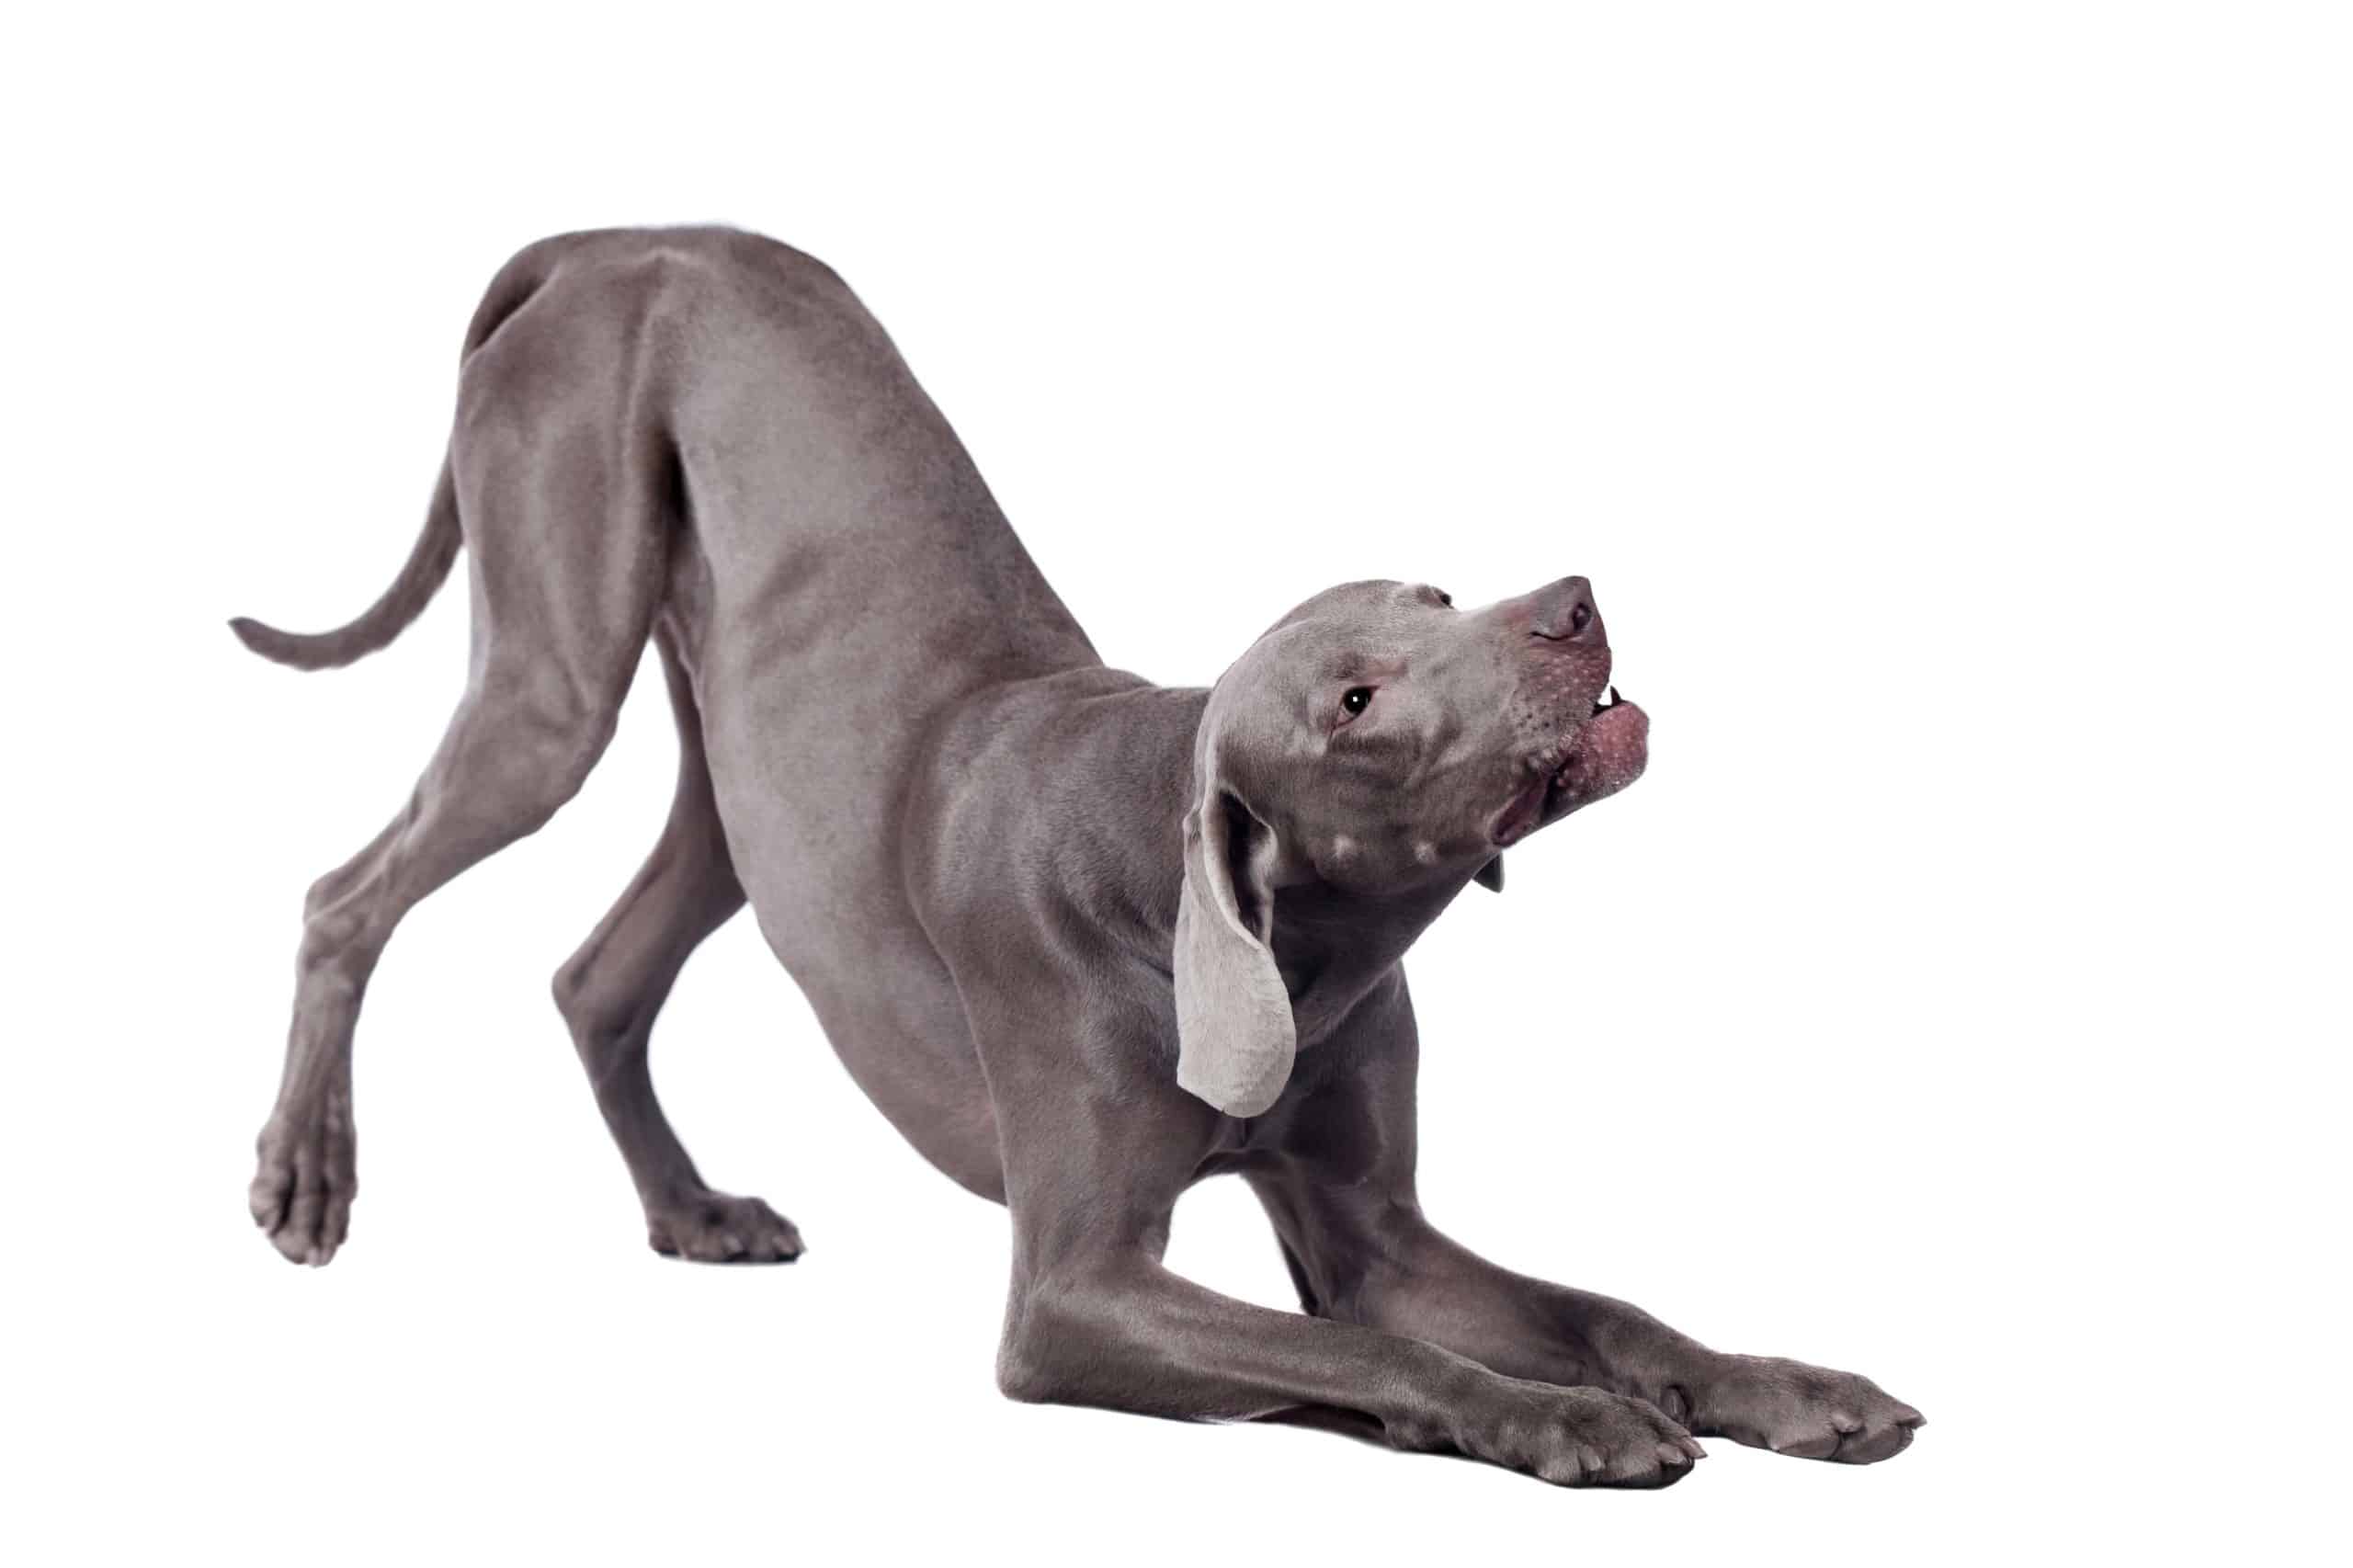 Weimaraner gives a play bow. Nicknamed the "gray ghost," the Weimaraner has a kind and patient disposition. The breed is active and playful, which makes it an ideal choice for dynamic families.